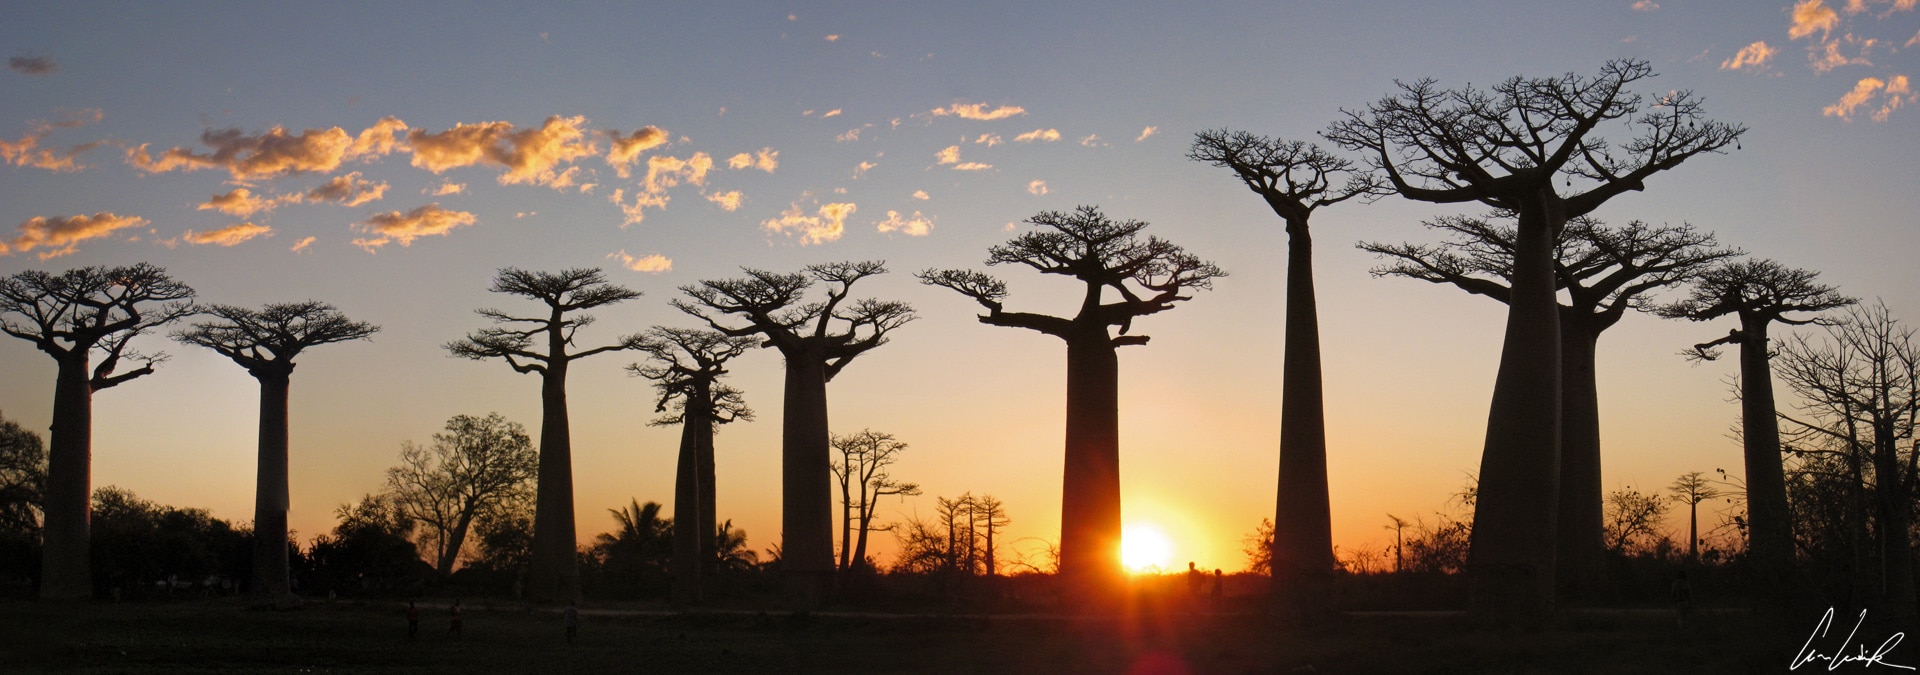 Alley of the Baobab